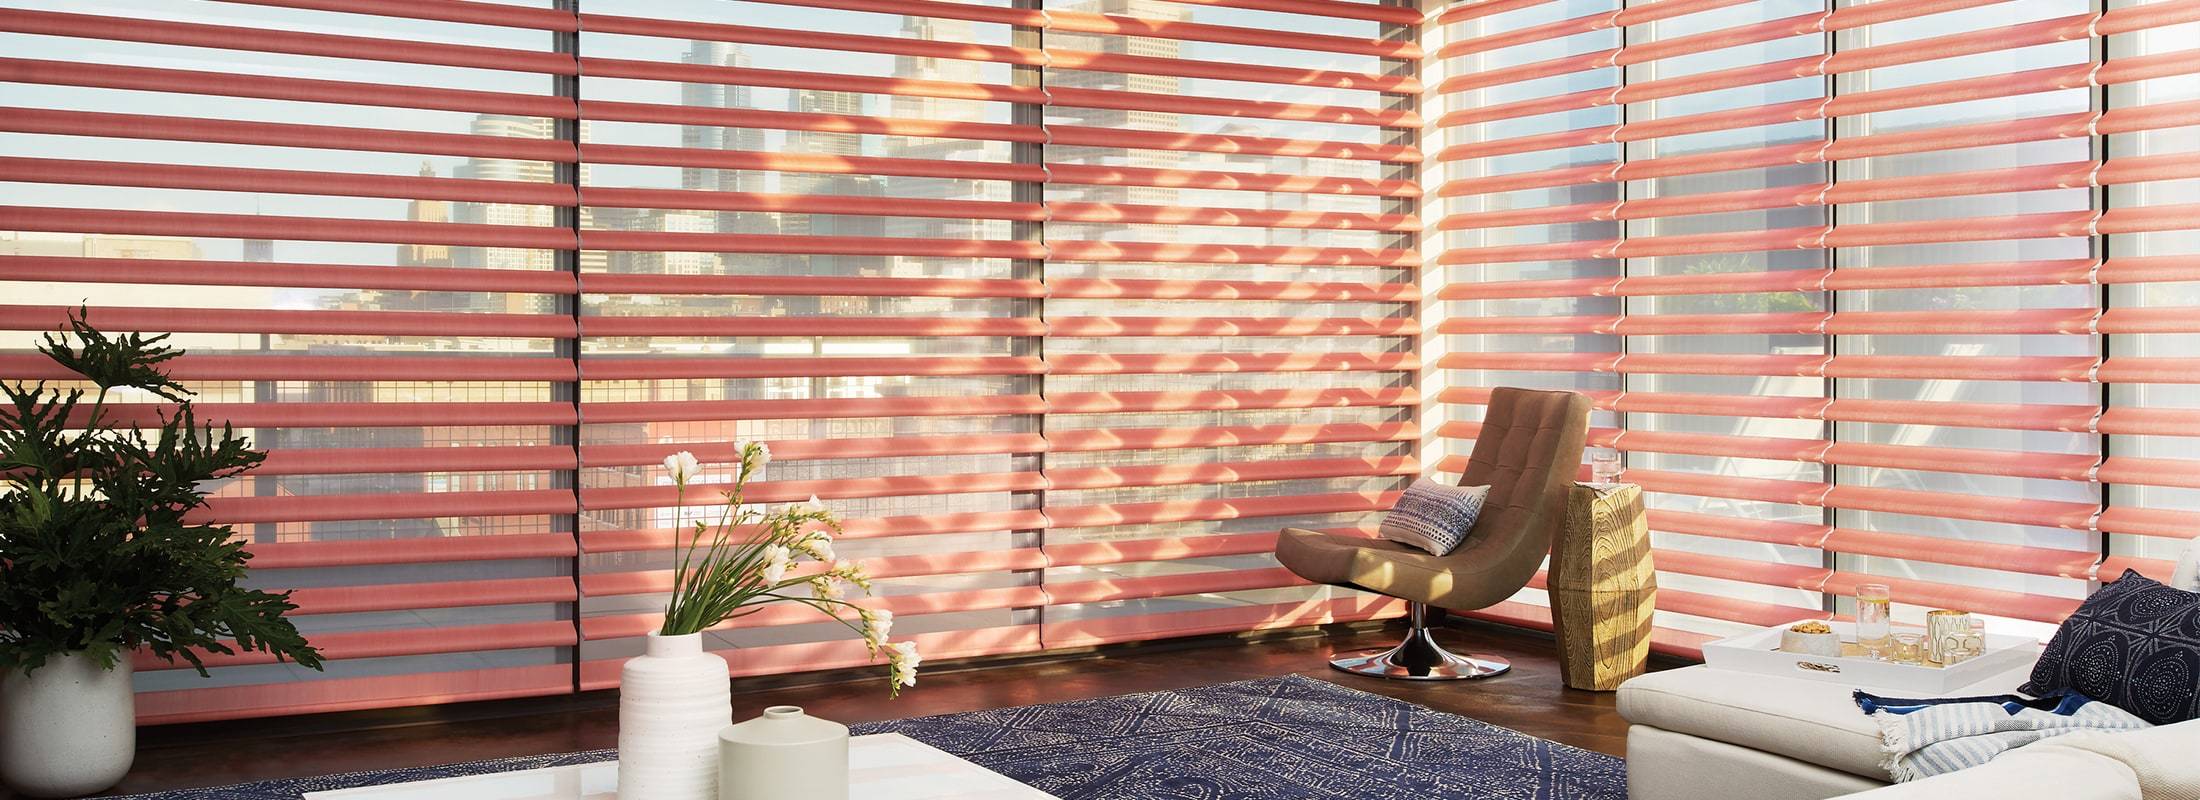 Our innovative Pirouette® Window Shadings feature soft horizontal fabric vanes attached to a single sheer backing. This allows for enhanced views to the outside while maintaining privacy and the full beauty of the fabric on the inside. Learn more about Pirouette® Window Shadings.